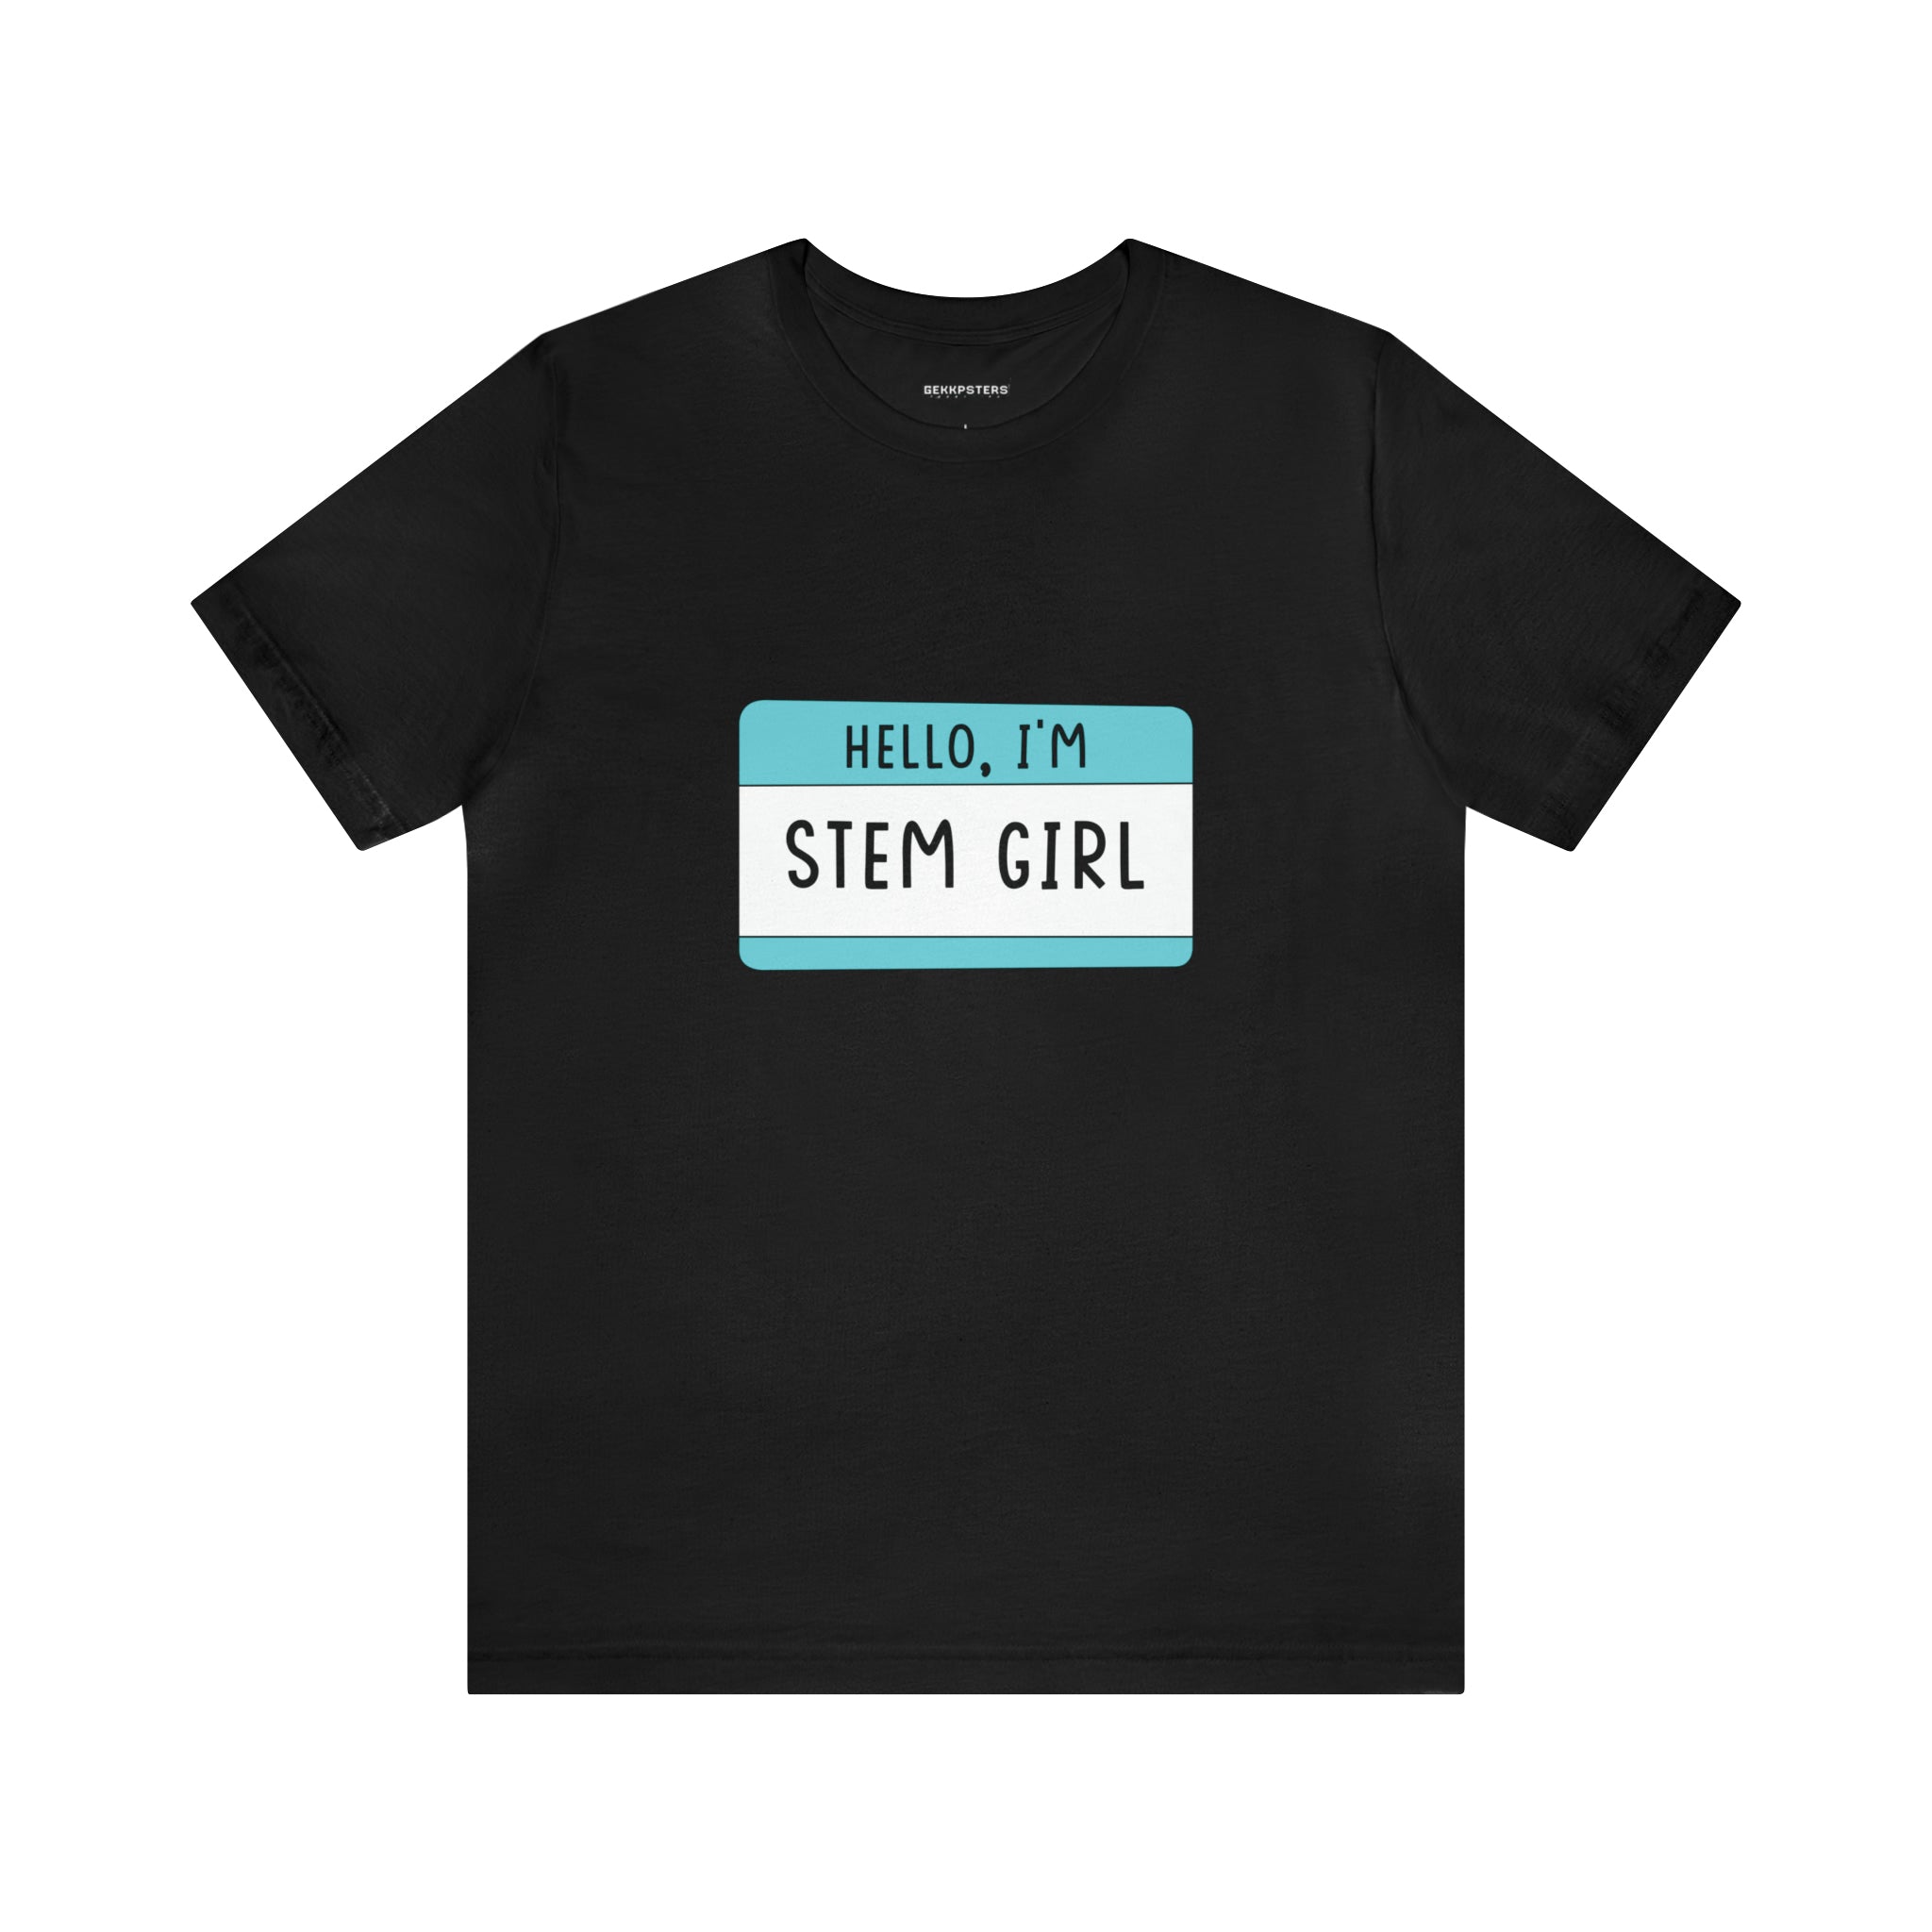 Black Hello, I'm Stem Girl T-Shirt designed to inspire curiosity among young minds.